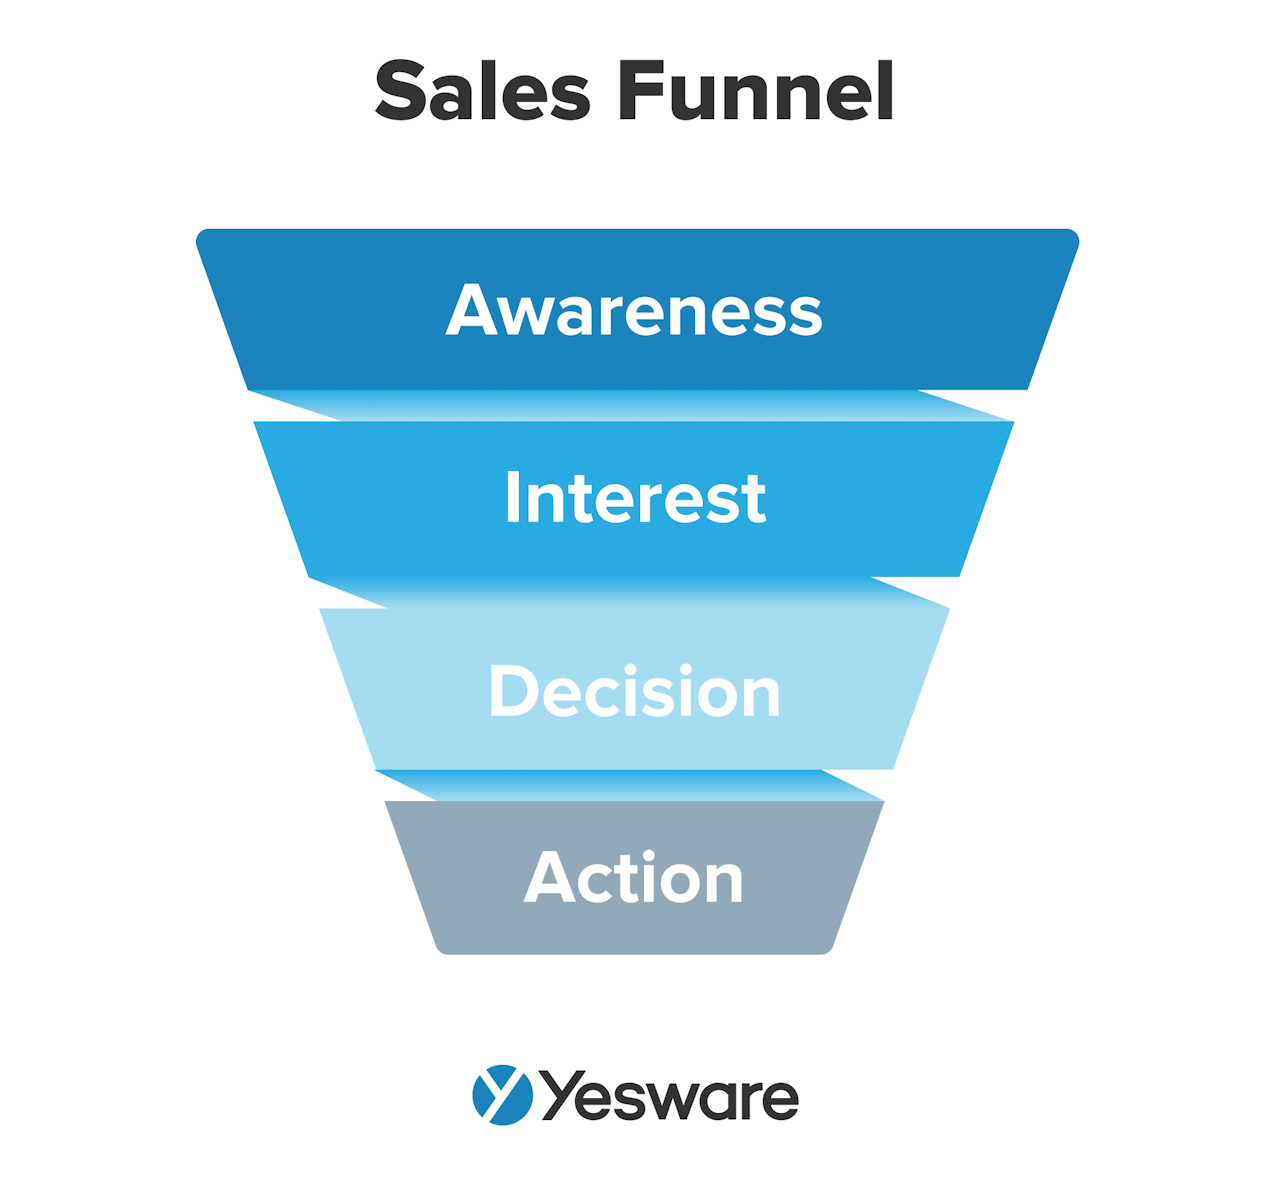 What is a sales funnel?